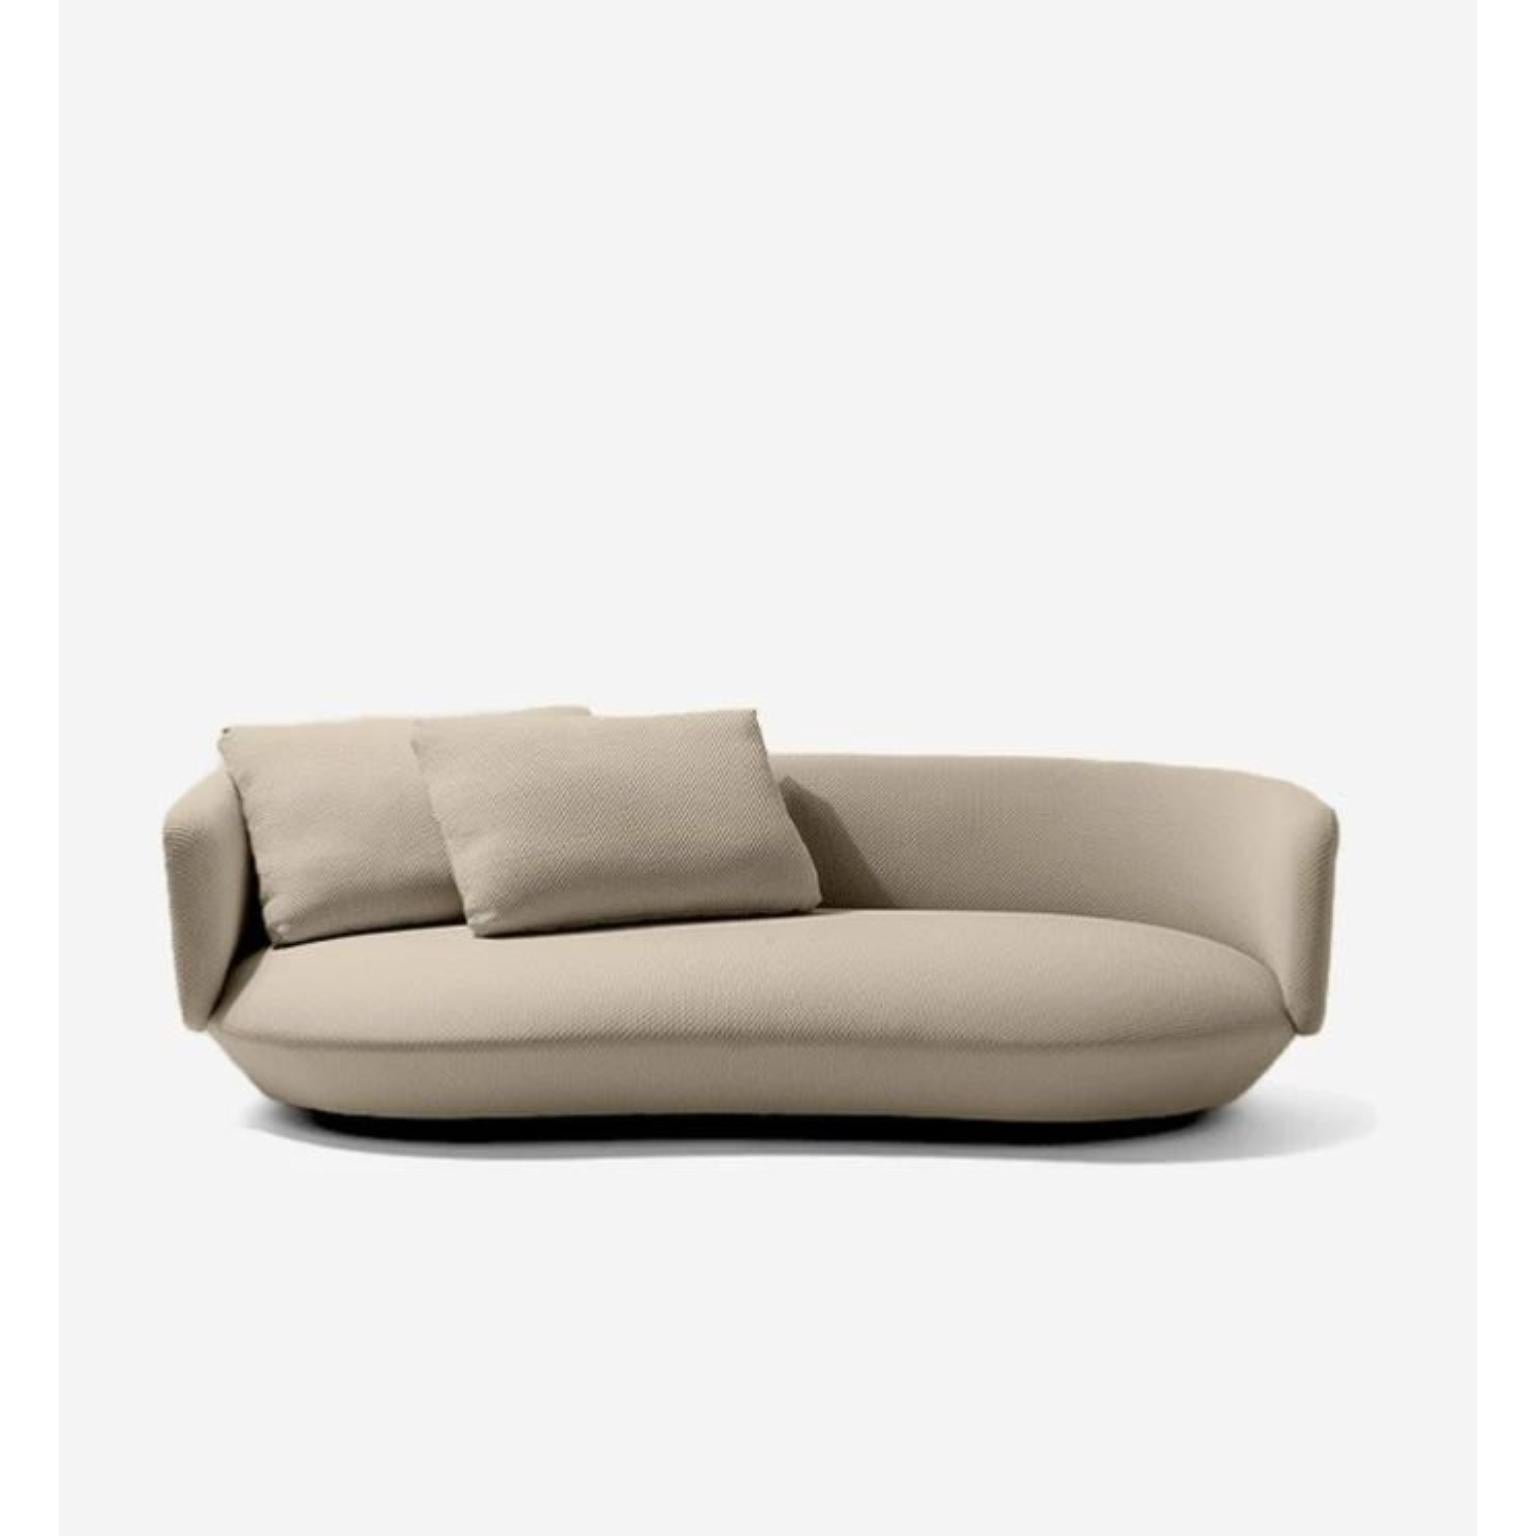 Large Baixo Sofa by Wentz
Dimensions: D 115 x W 300 x H 58 cm
Materials: Wood, Upholstery.
4 cushions included

The Baixo sofa proposes a different way of sitting. An invitation to casual comfort, closer to the ground. The organic structure is